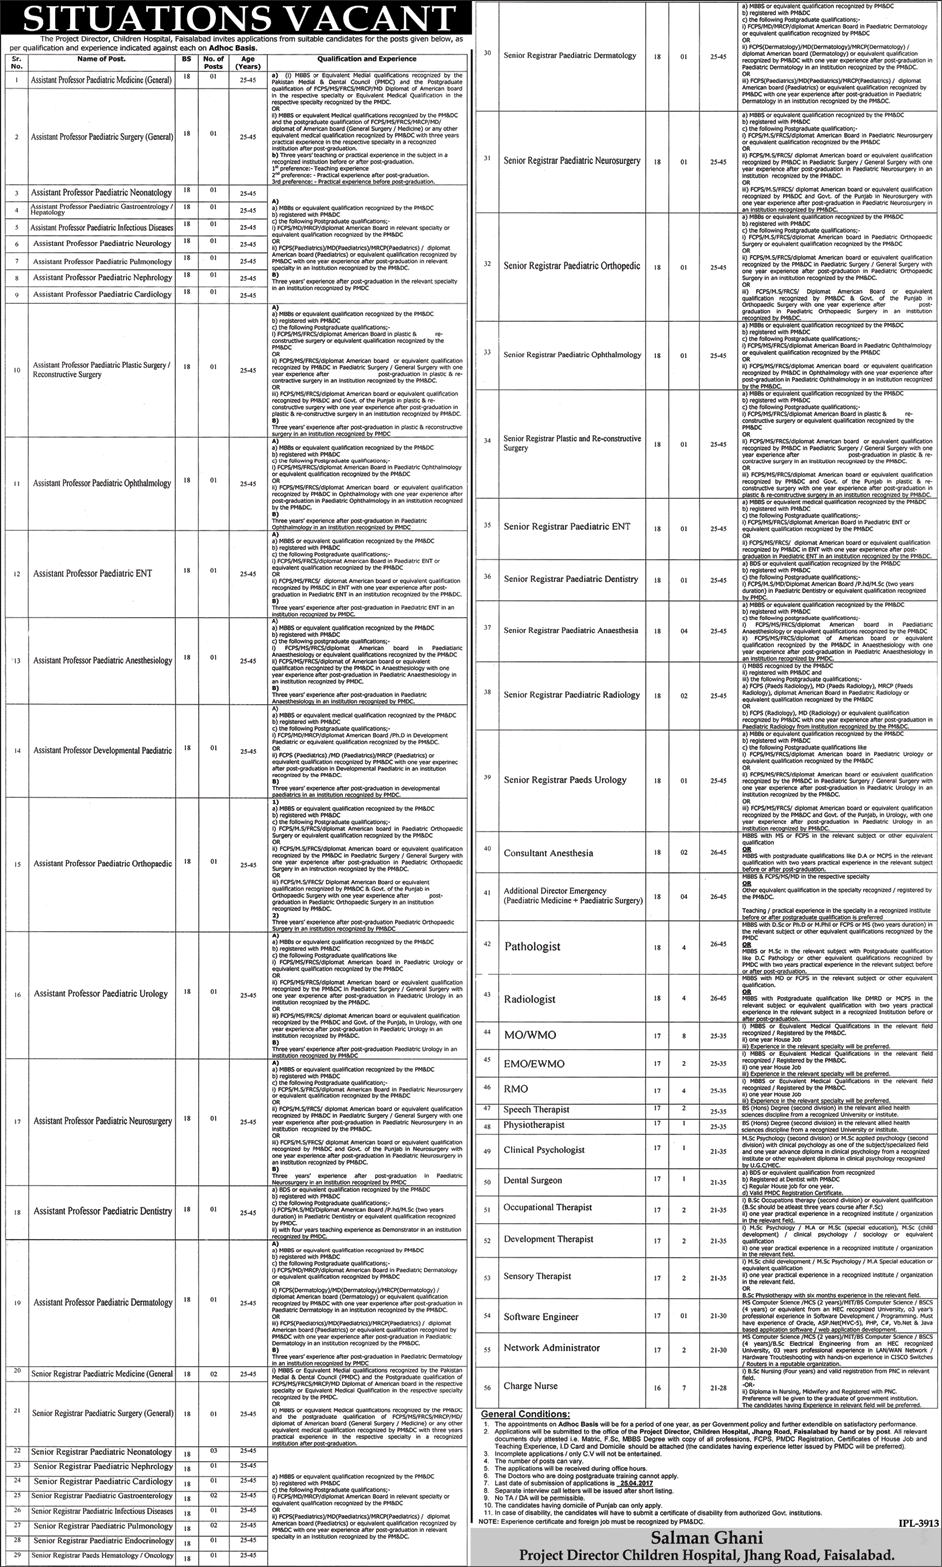 Children's Hospital Faisalabad Jobs 2017 April Teaching Faculty, Medical Officers, Nurses & Others Latest